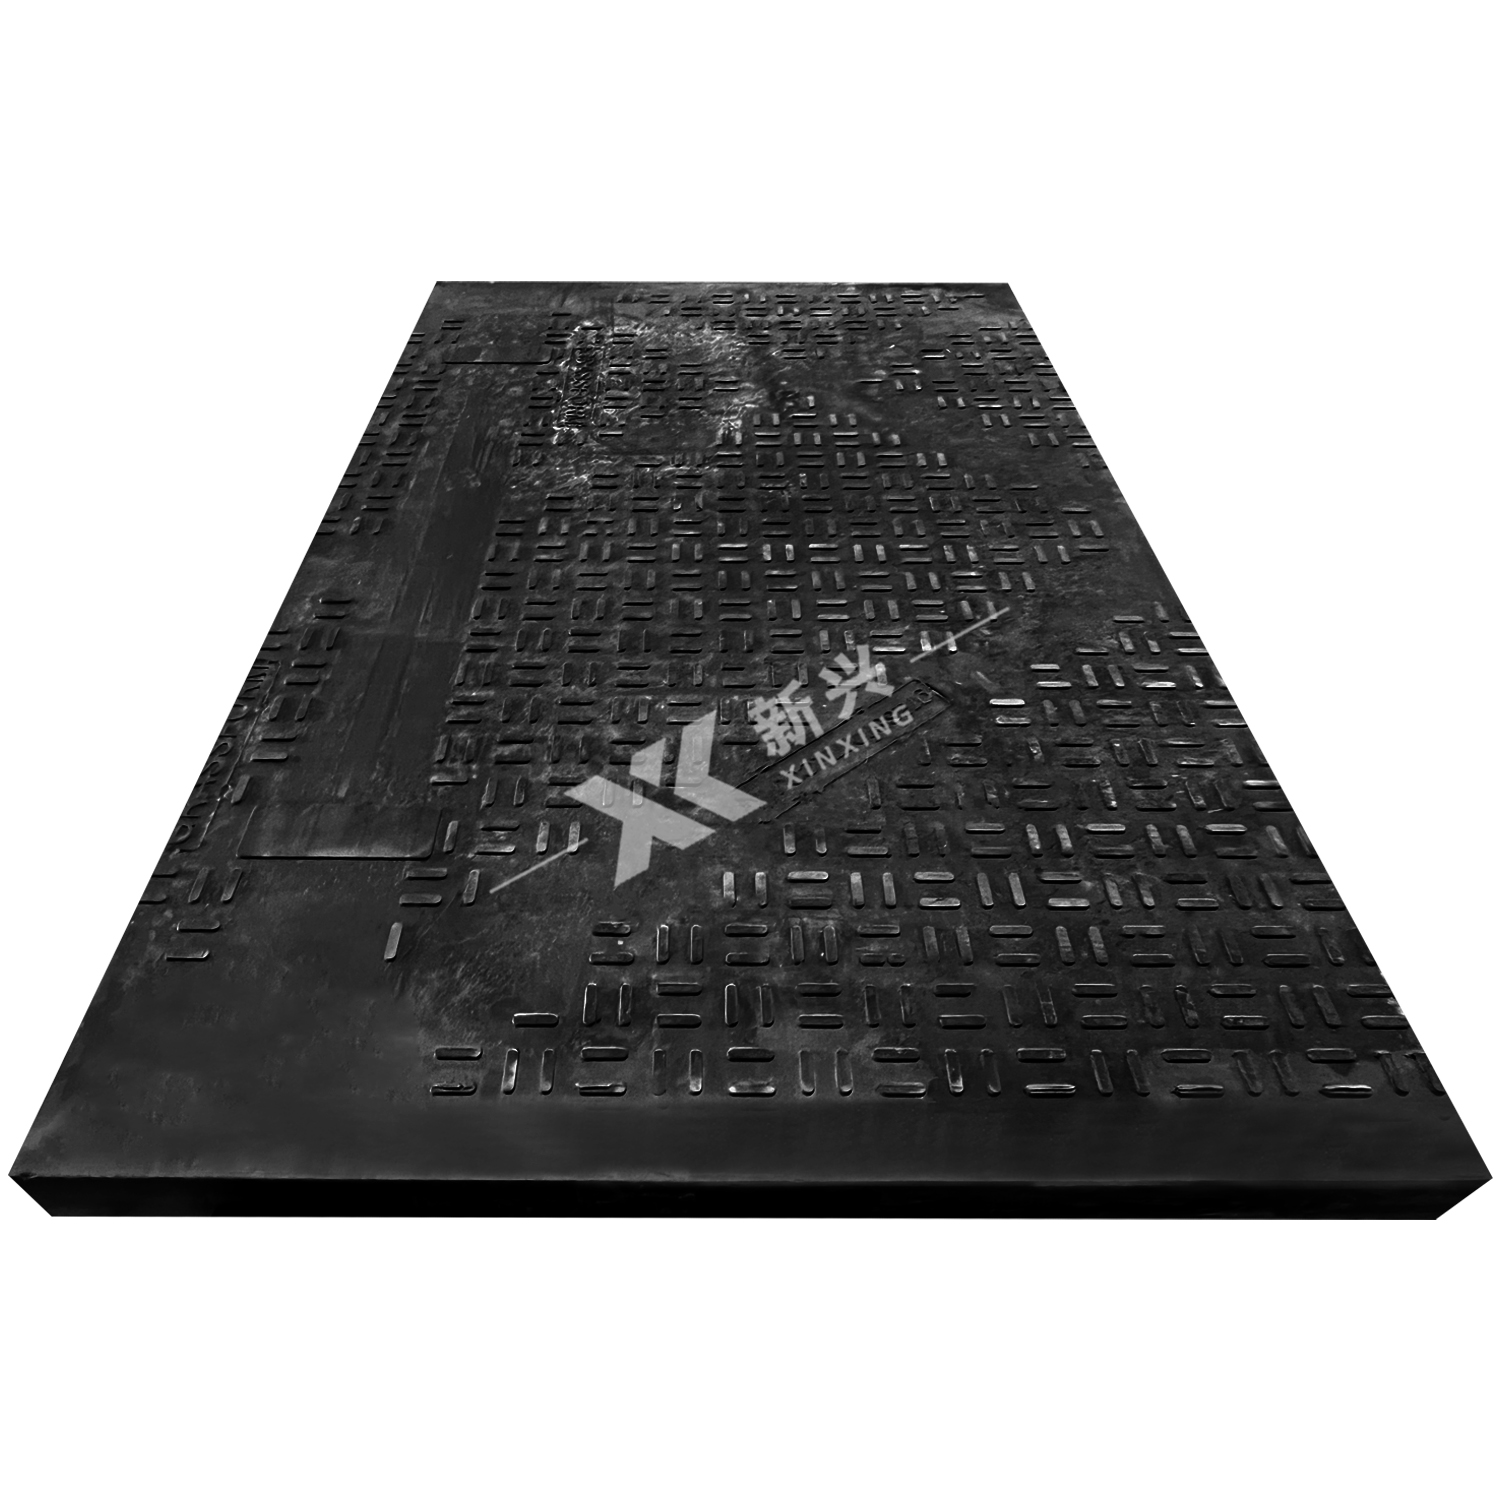 Construction Protection Hdpe Material Plastic Ground Protection Mats